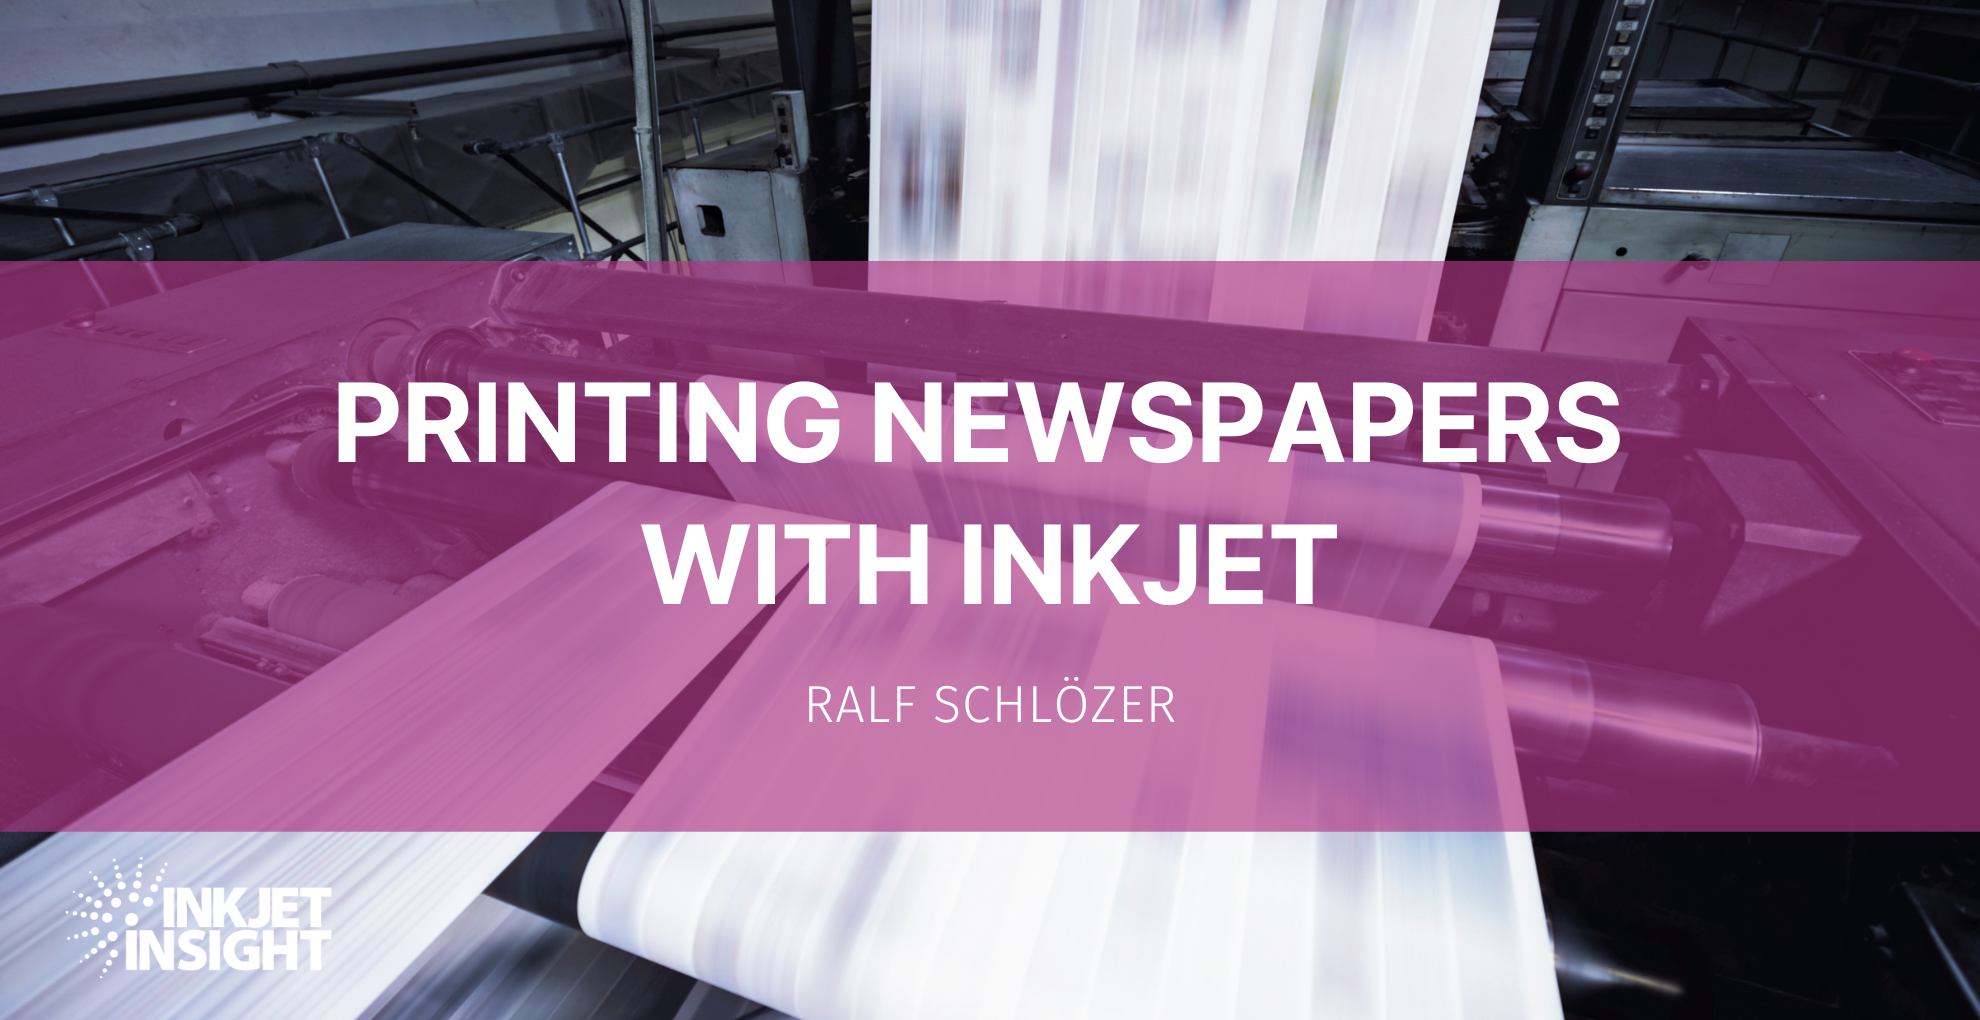 Featured image for “Printing Newspapers with Inkjet”